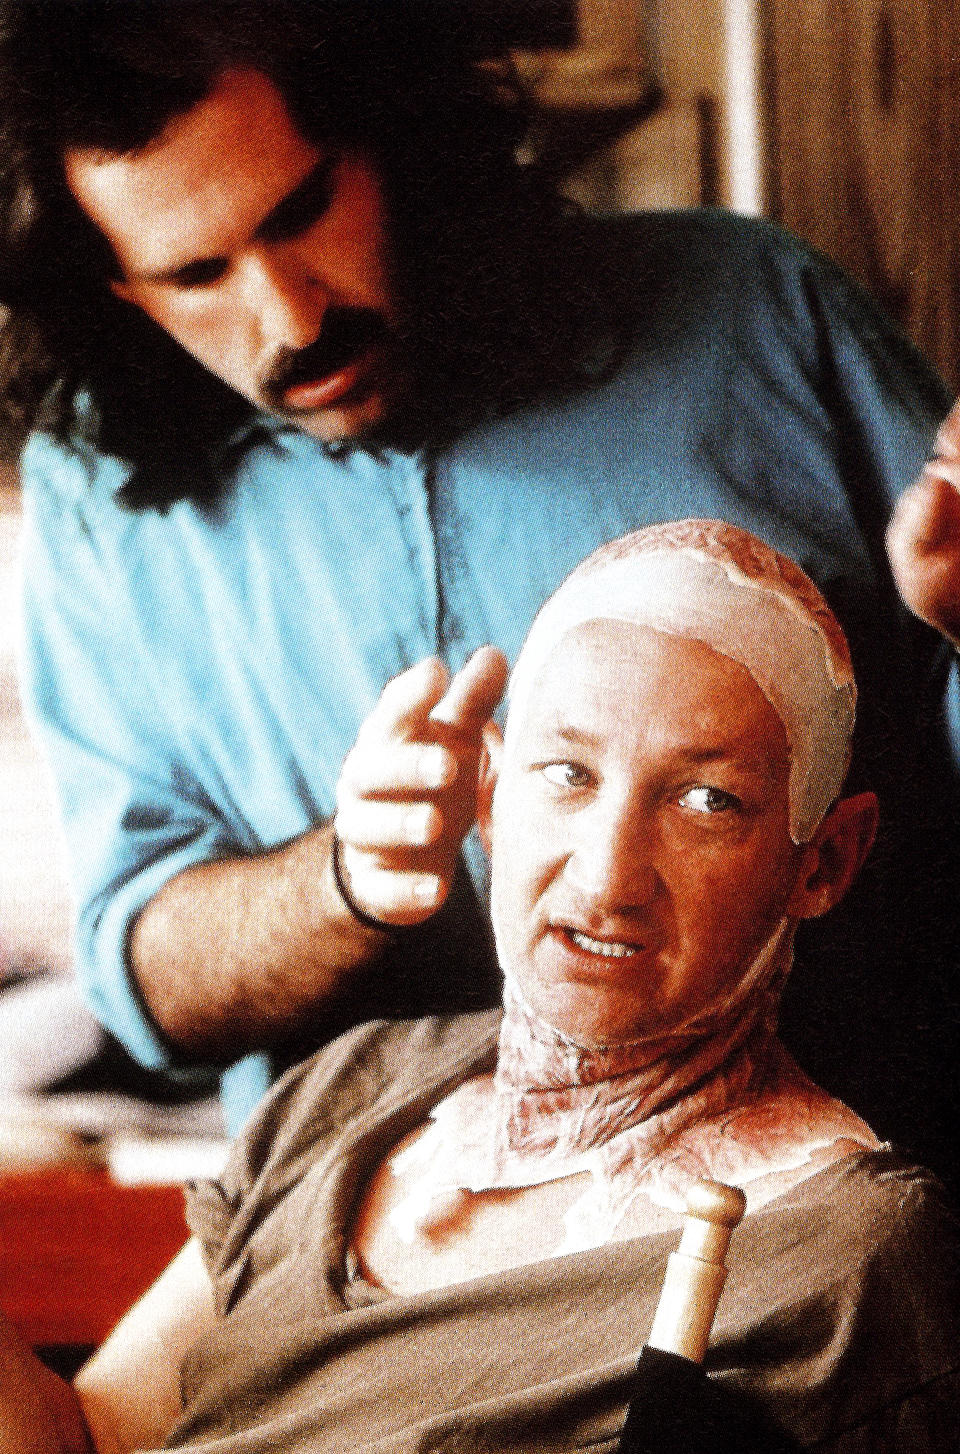 Howard Berger and Robert Englund. ‘Courtesy of the Howard Berger Collection’